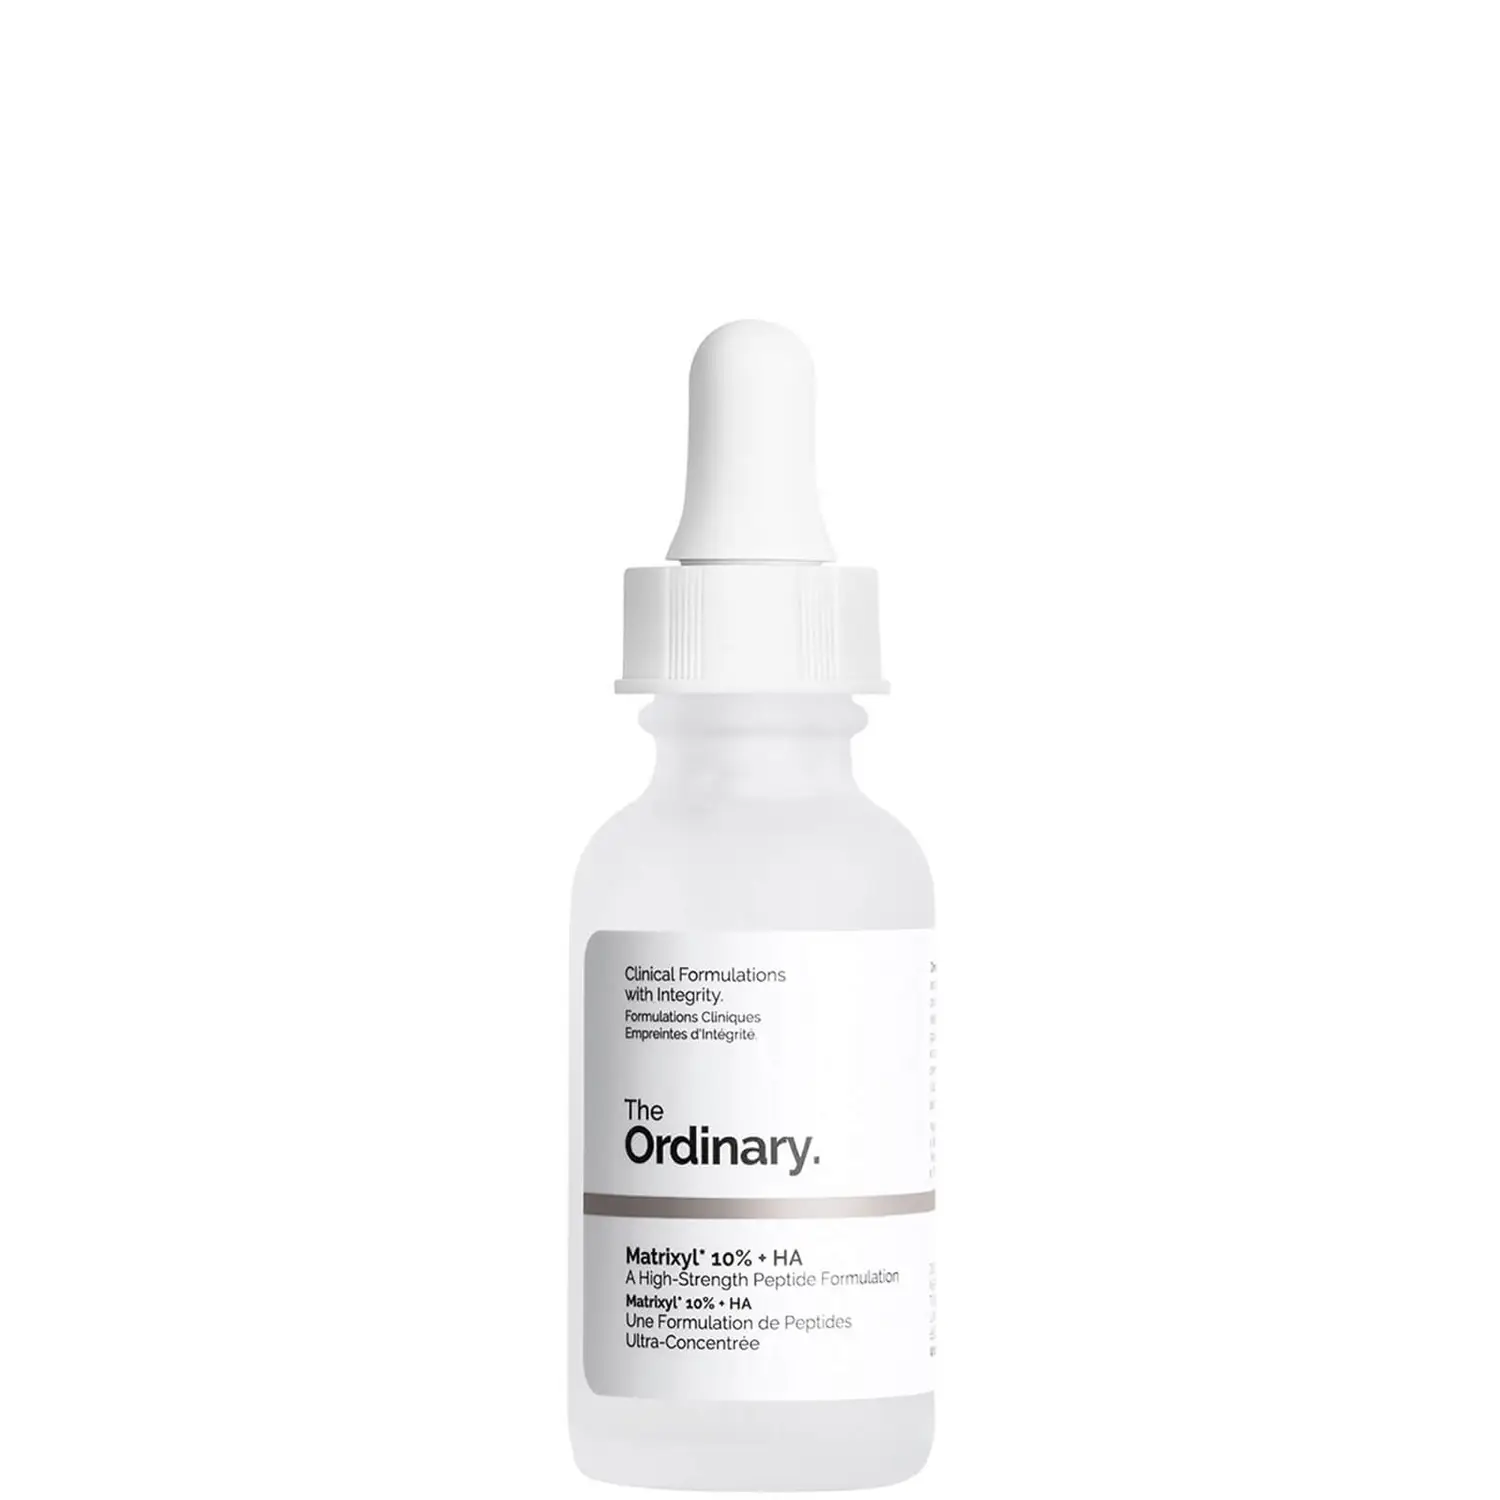 Matrixyl 10% + HA by The Ordinary, a high-strength peptide formulation.